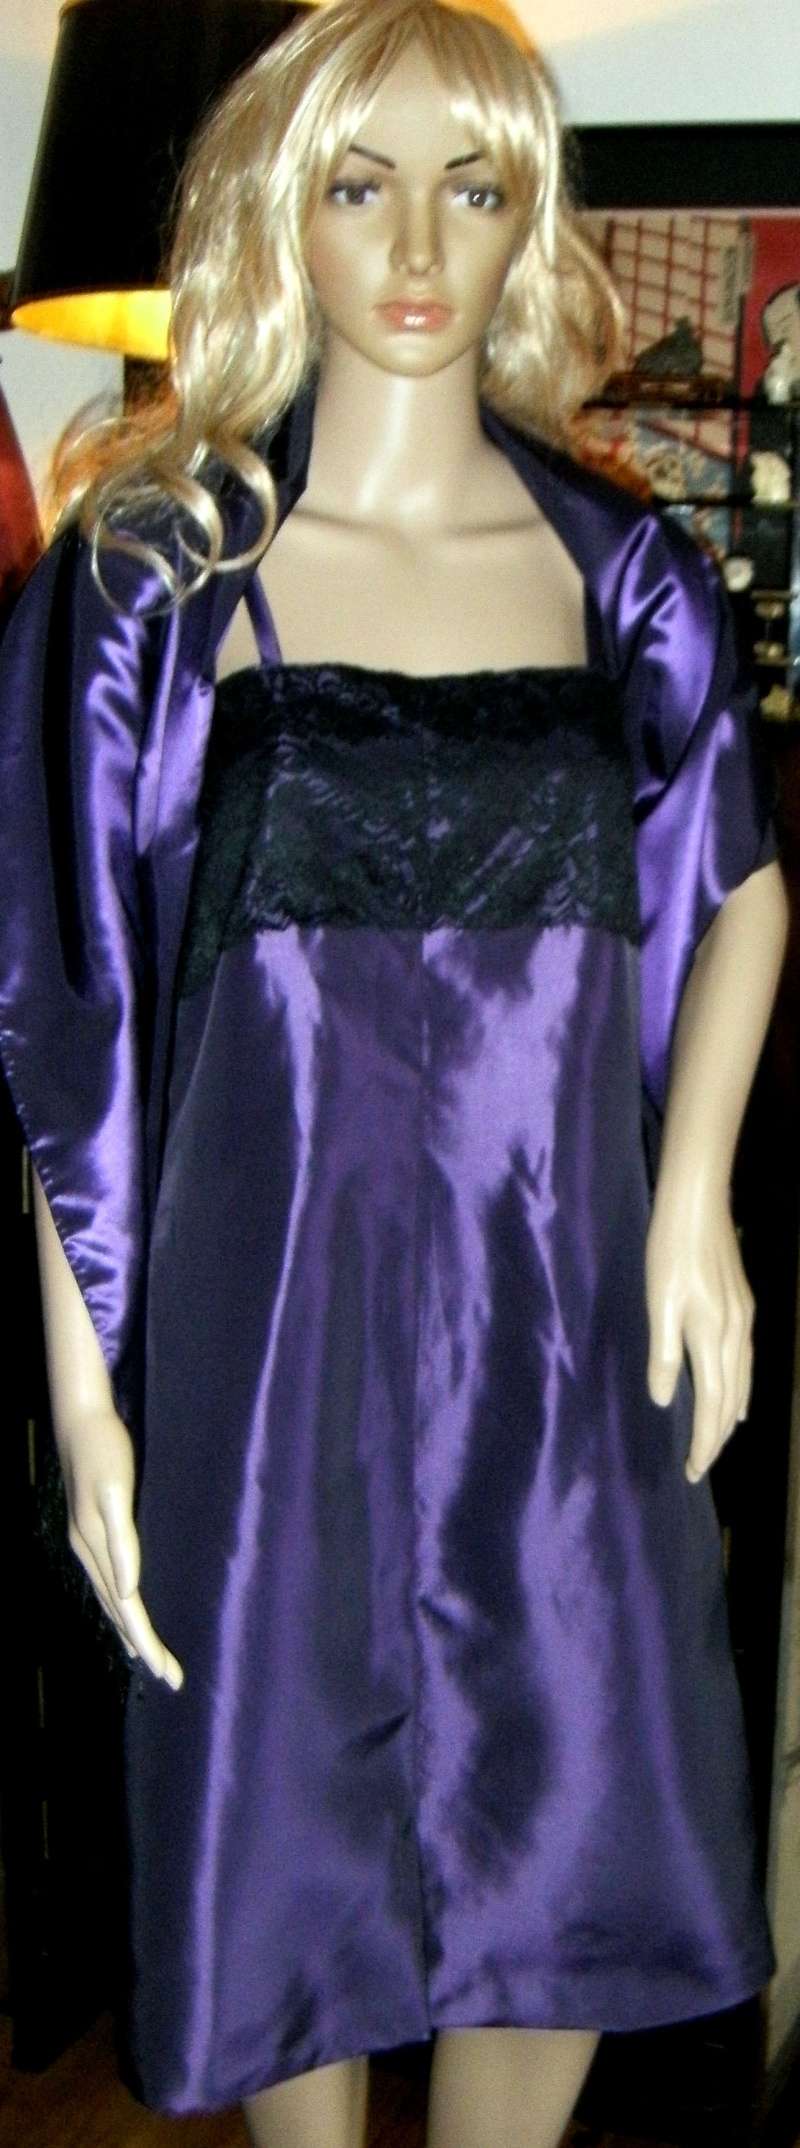 Galerie couture, broderie, de Lise - Page 14 Robe_e10